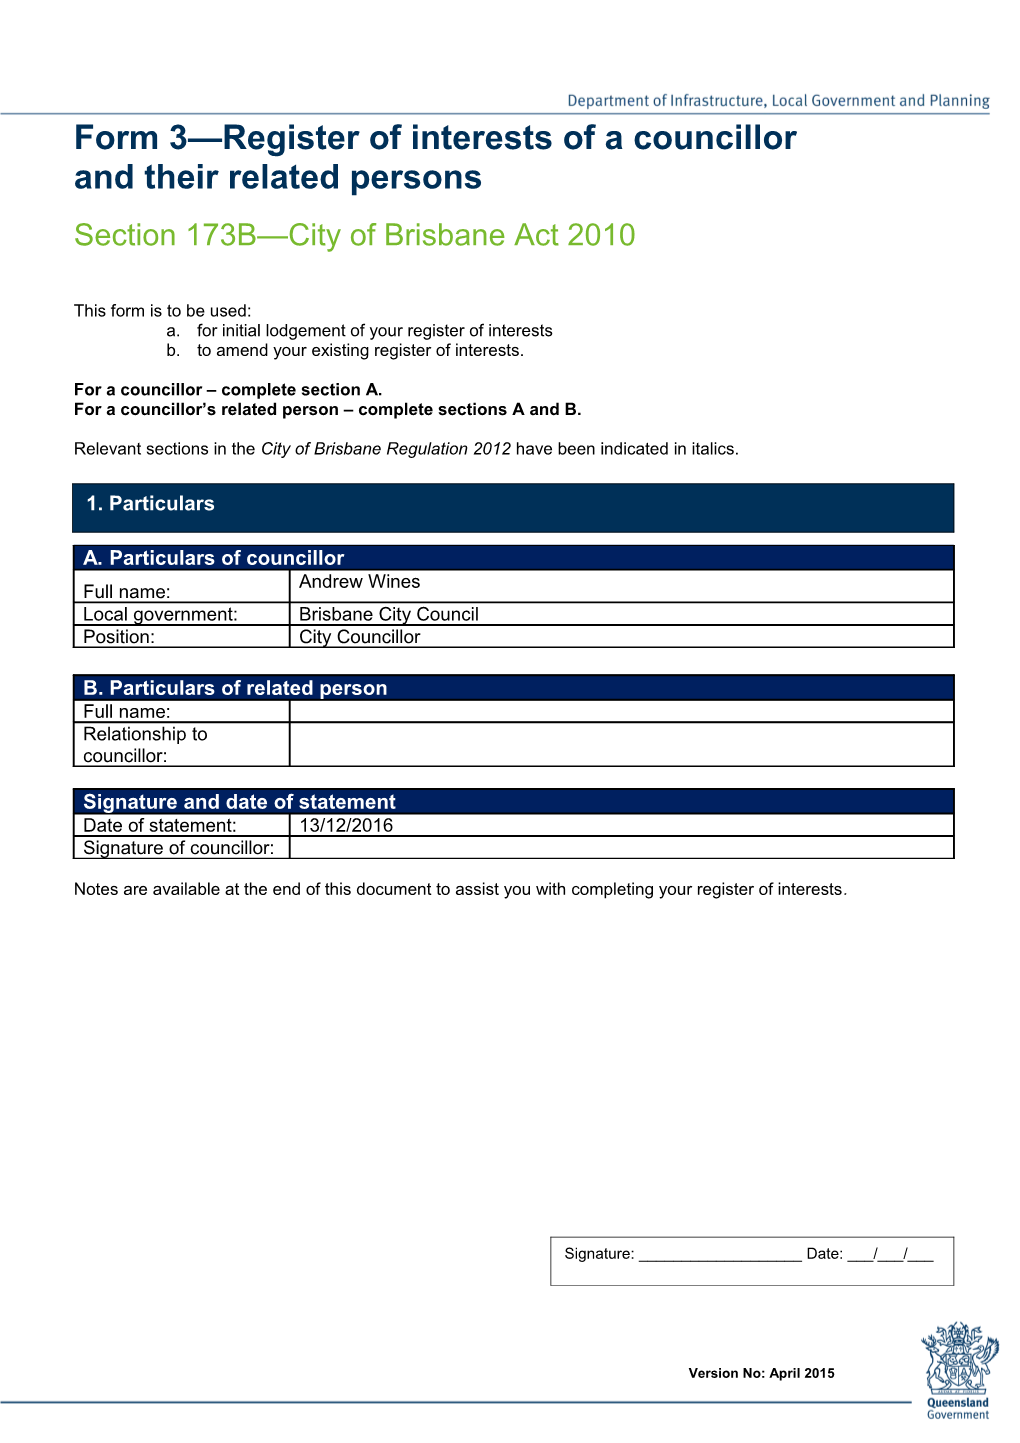 Form 3 - Register of Interests of a Councillor and Their Related Persons s2